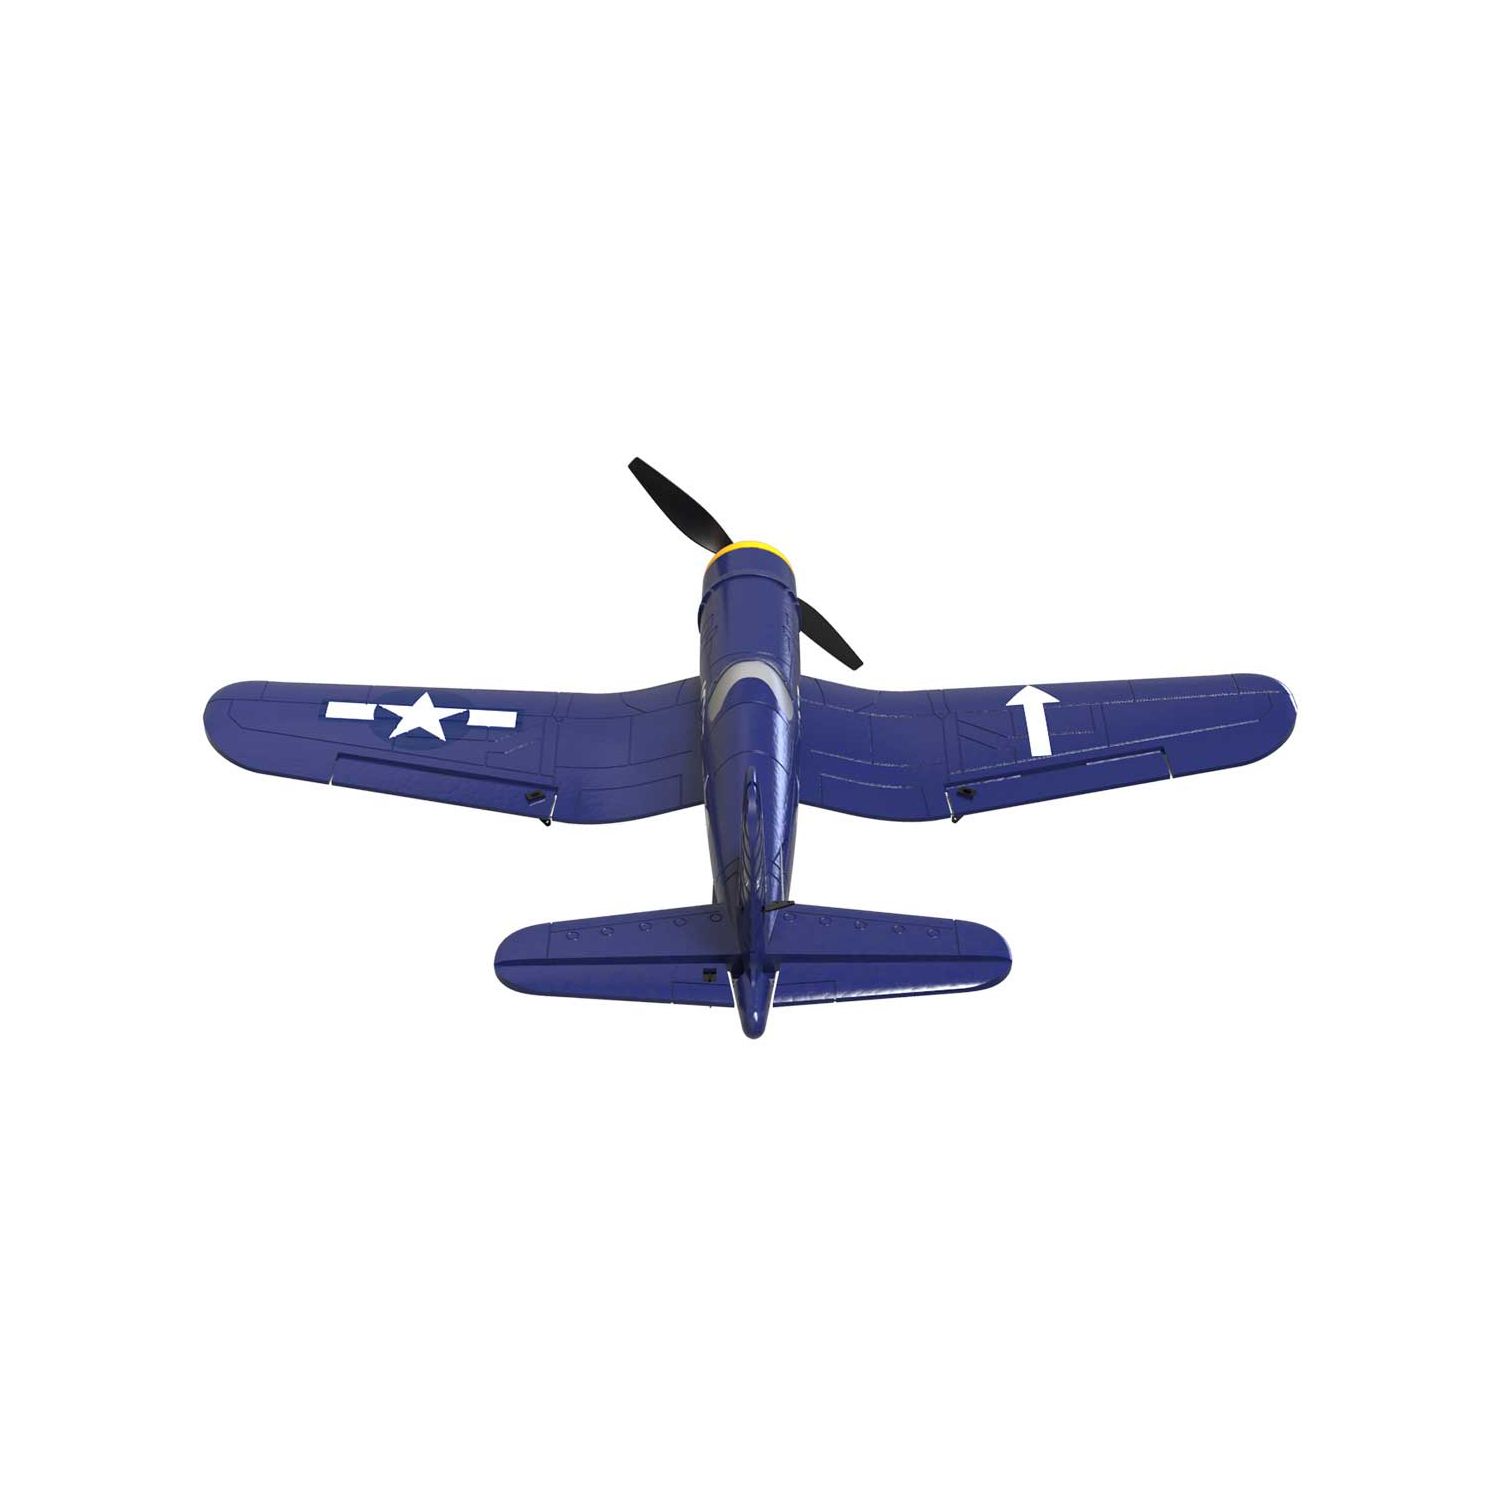 2.4G RC 4CH Airplane 400mm Wingspan Fixed Wing Aircraft with Xpilot Gyro System for Beginner RTF VOLANTEXRC F4U Corsair Airplane 